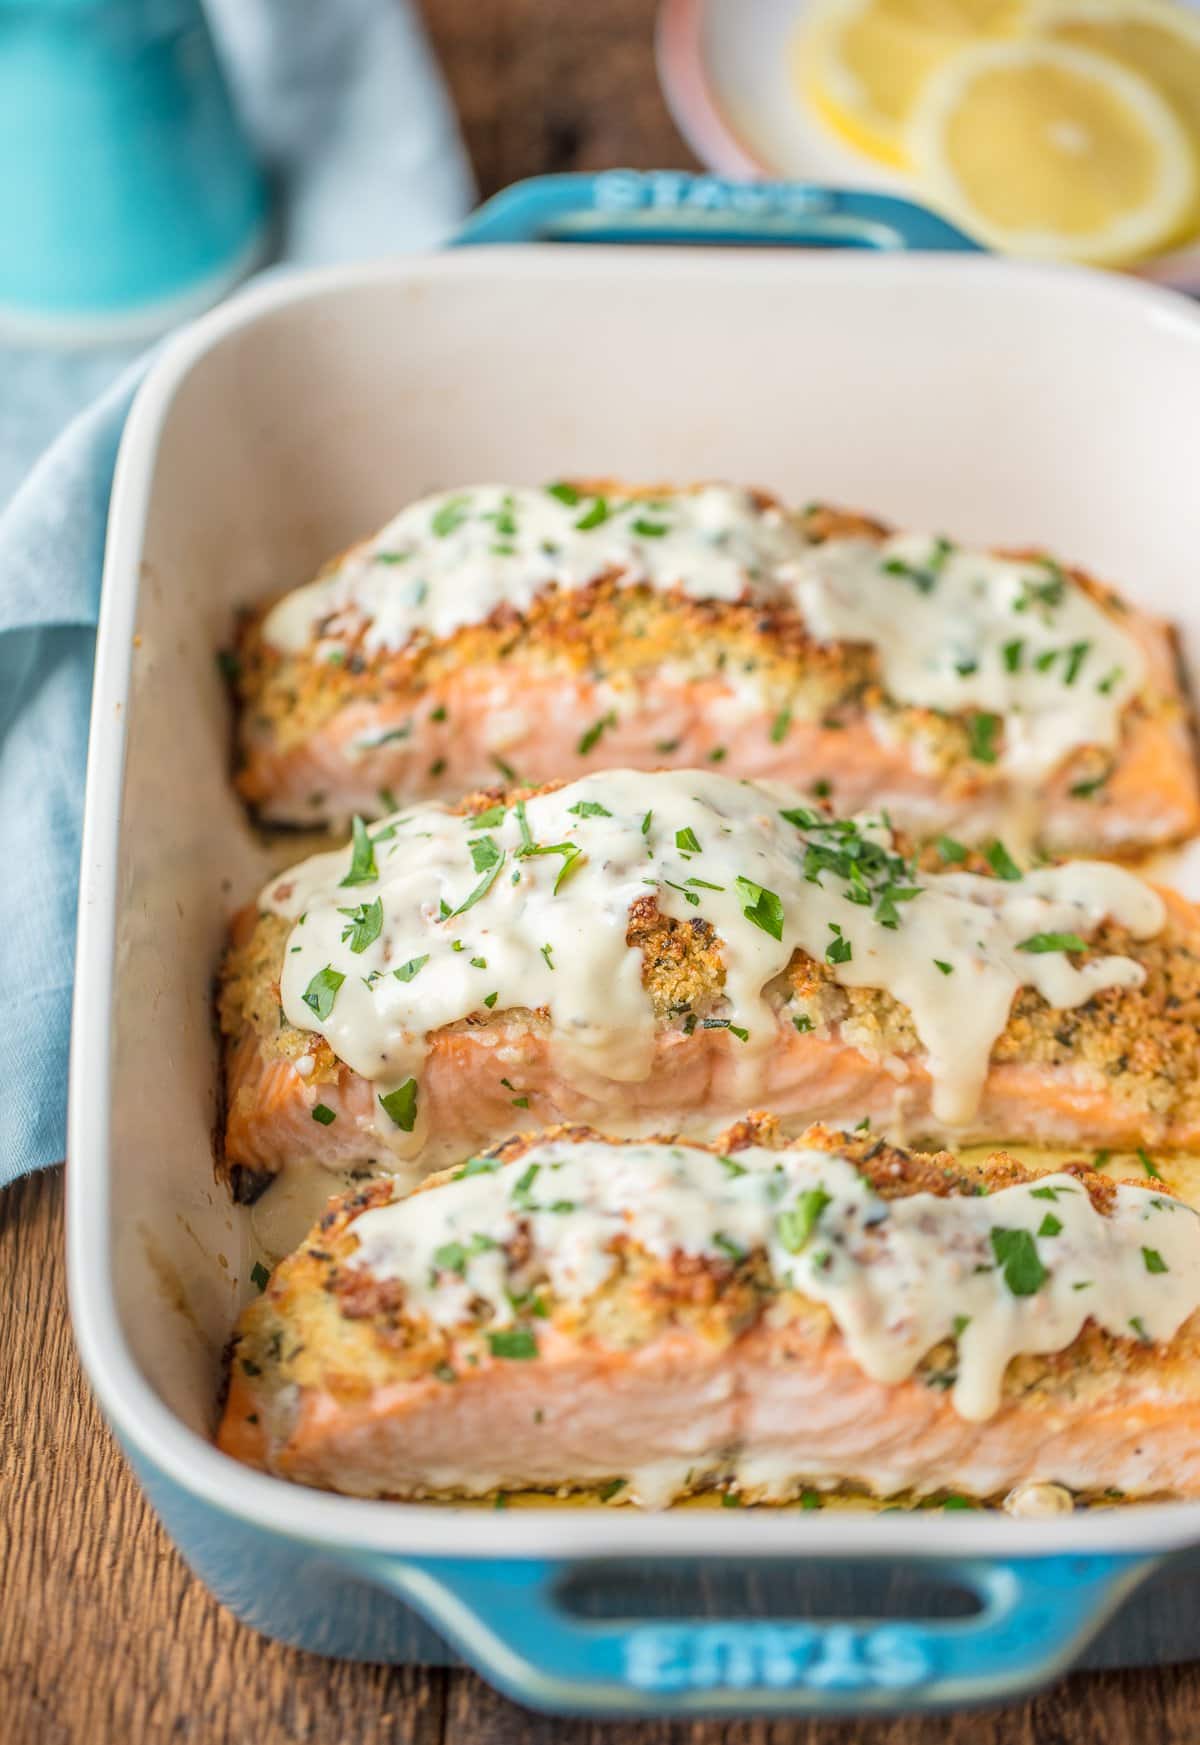 Parmesan Crusted Salmon topped with white wine sauce